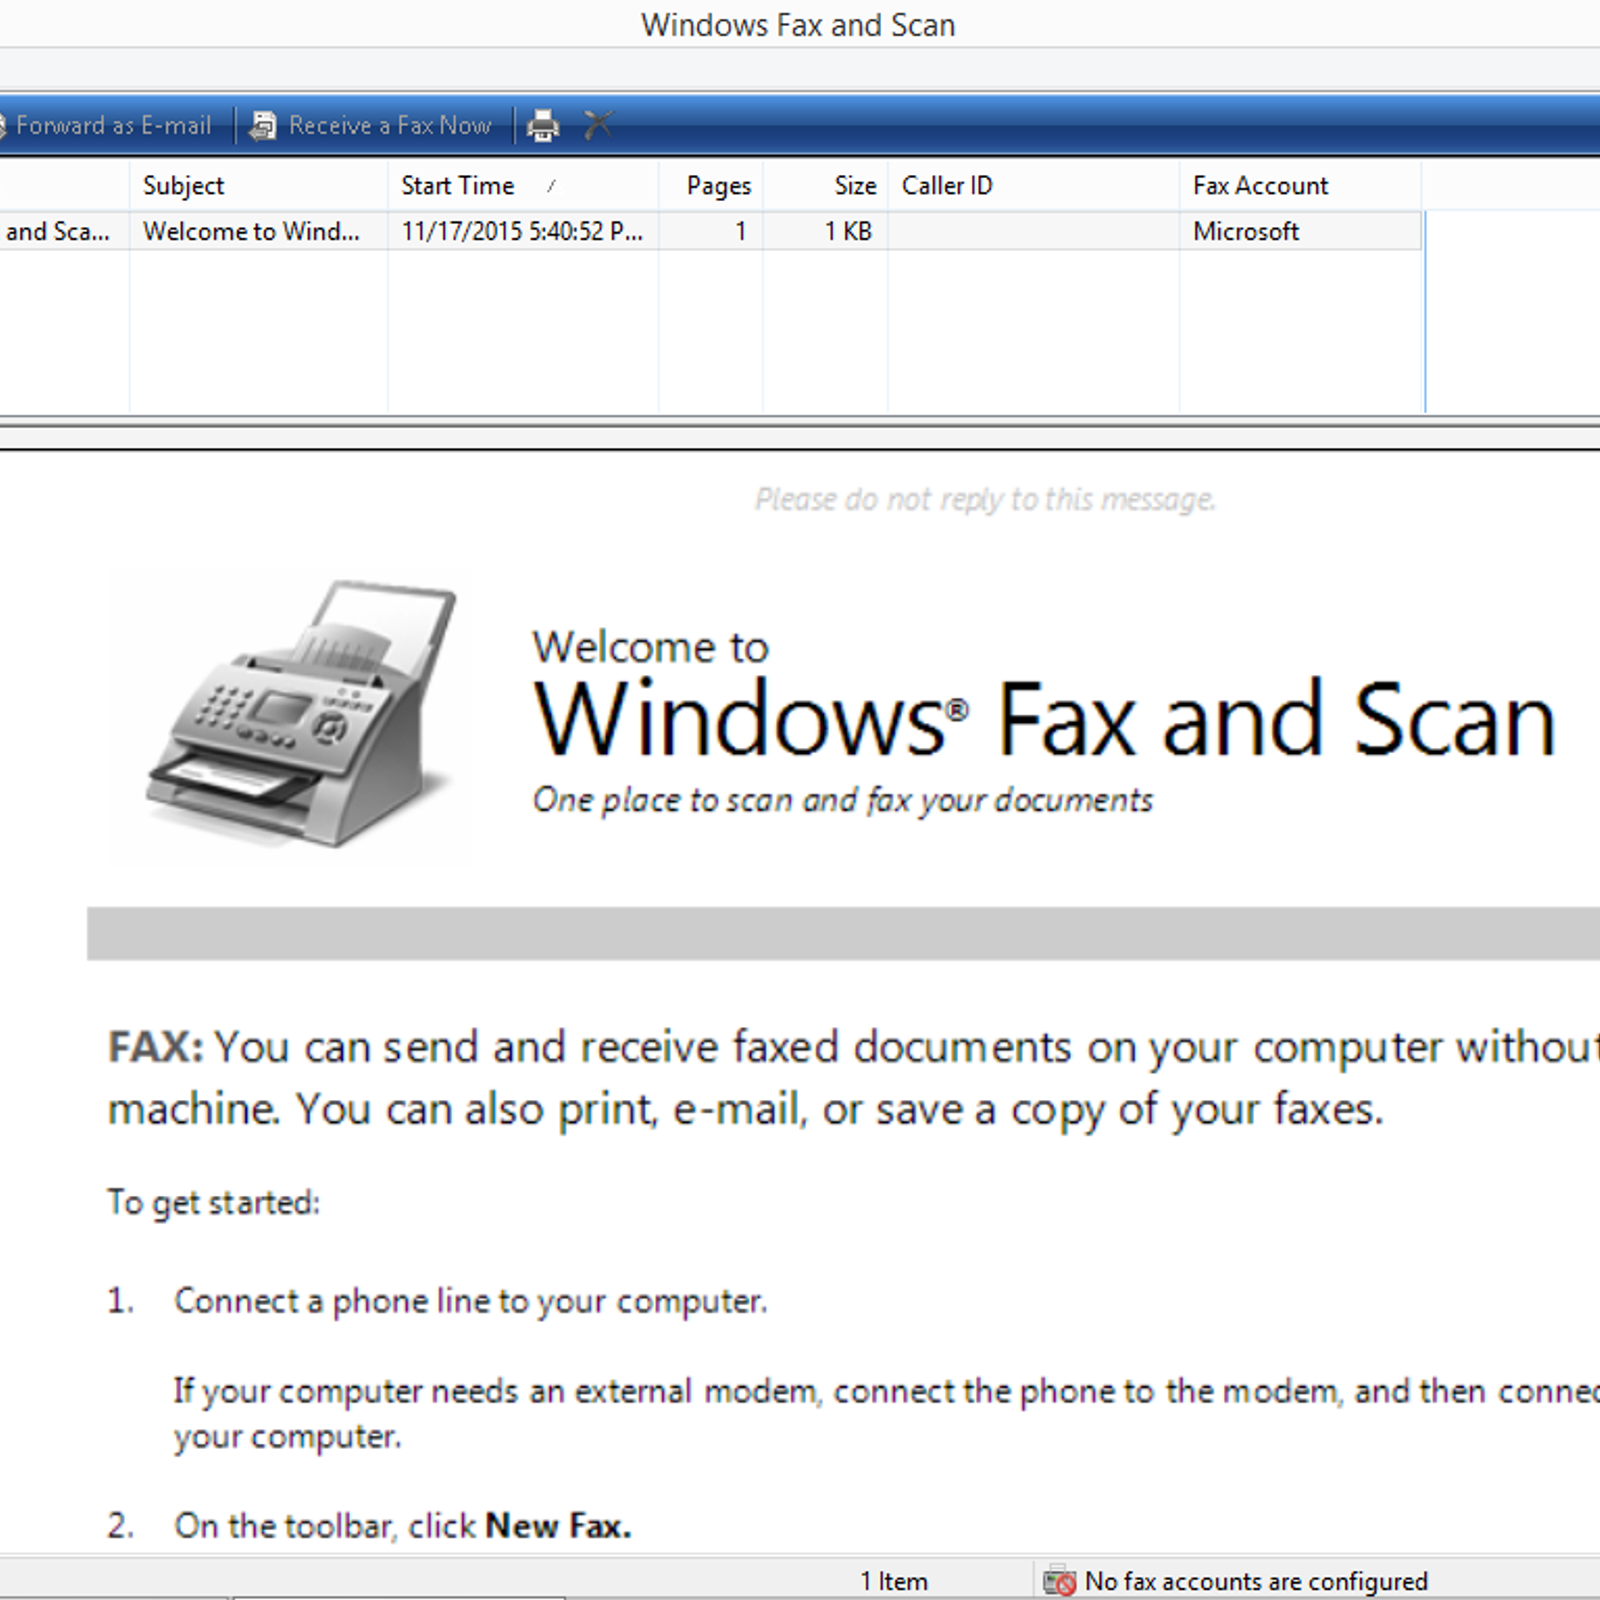 download windows fax and scan software